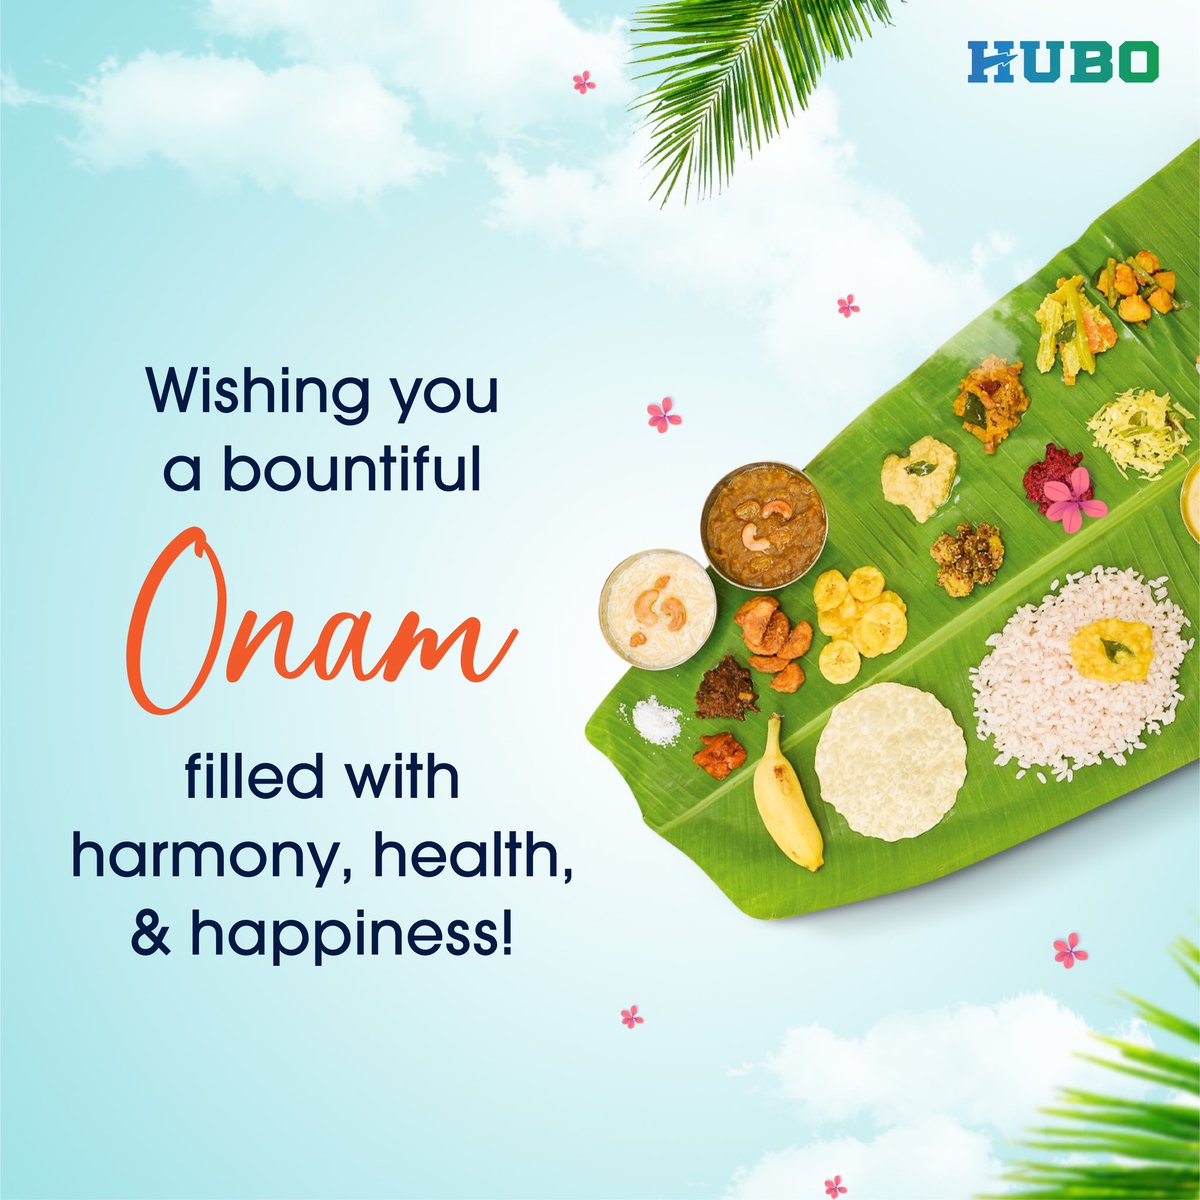 Celebrate the essence of tradition & togetherness today ✨

Feast your heart out, dance in joy & have a delightfully Happy Onam 🪔🙏🏼 

#Hubo #Onam #Celebration #FestiveCheer #KeralaTraditions #OnamWishes #OnamGreetings #HuboRentals